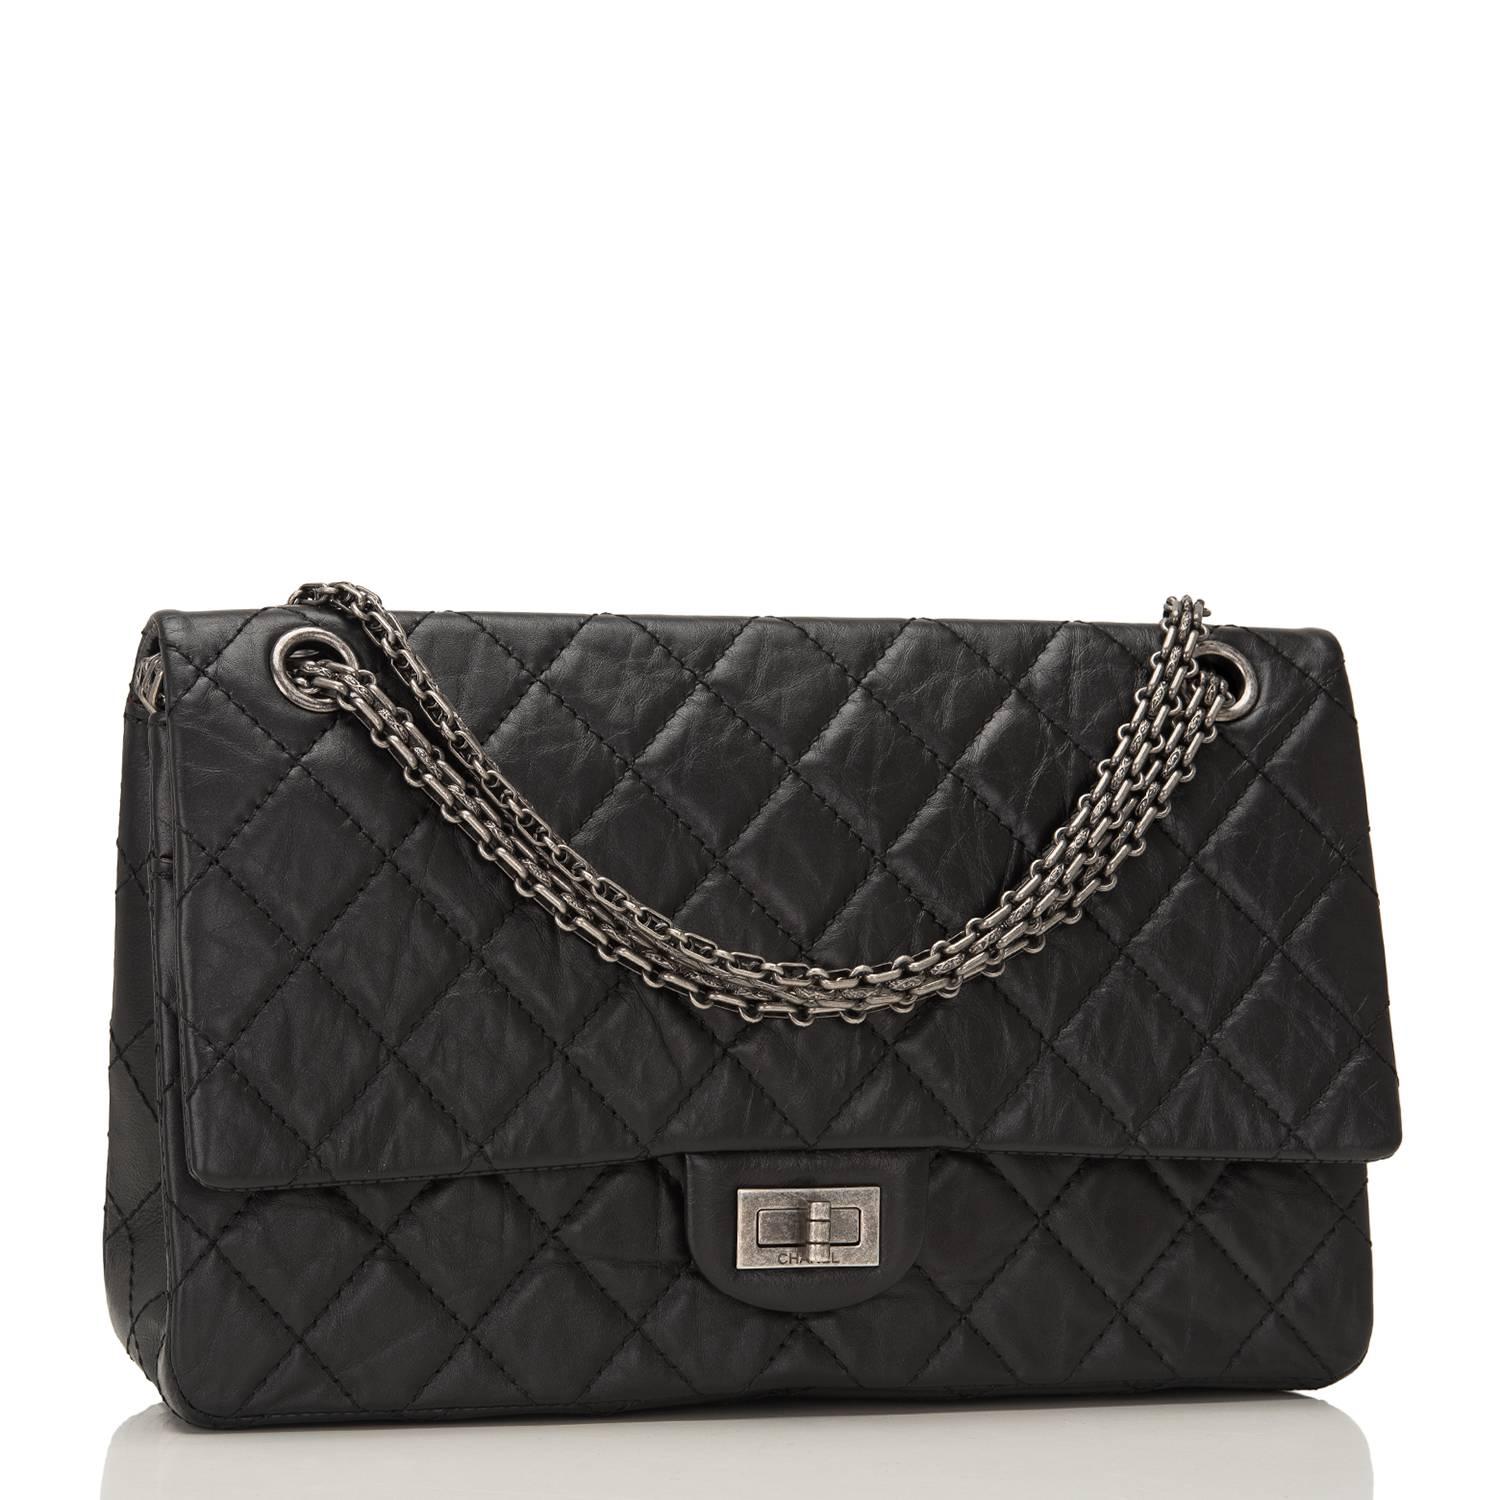 Chanel black quilted aged calfskin leather Reissue 2.55 double flap size 255 with aged ruthenium hardware.

This bag has a front flap with CC turn lock closure, burgundy leather interior, half moon back pocket and adjustable ruthenium bijoux chain